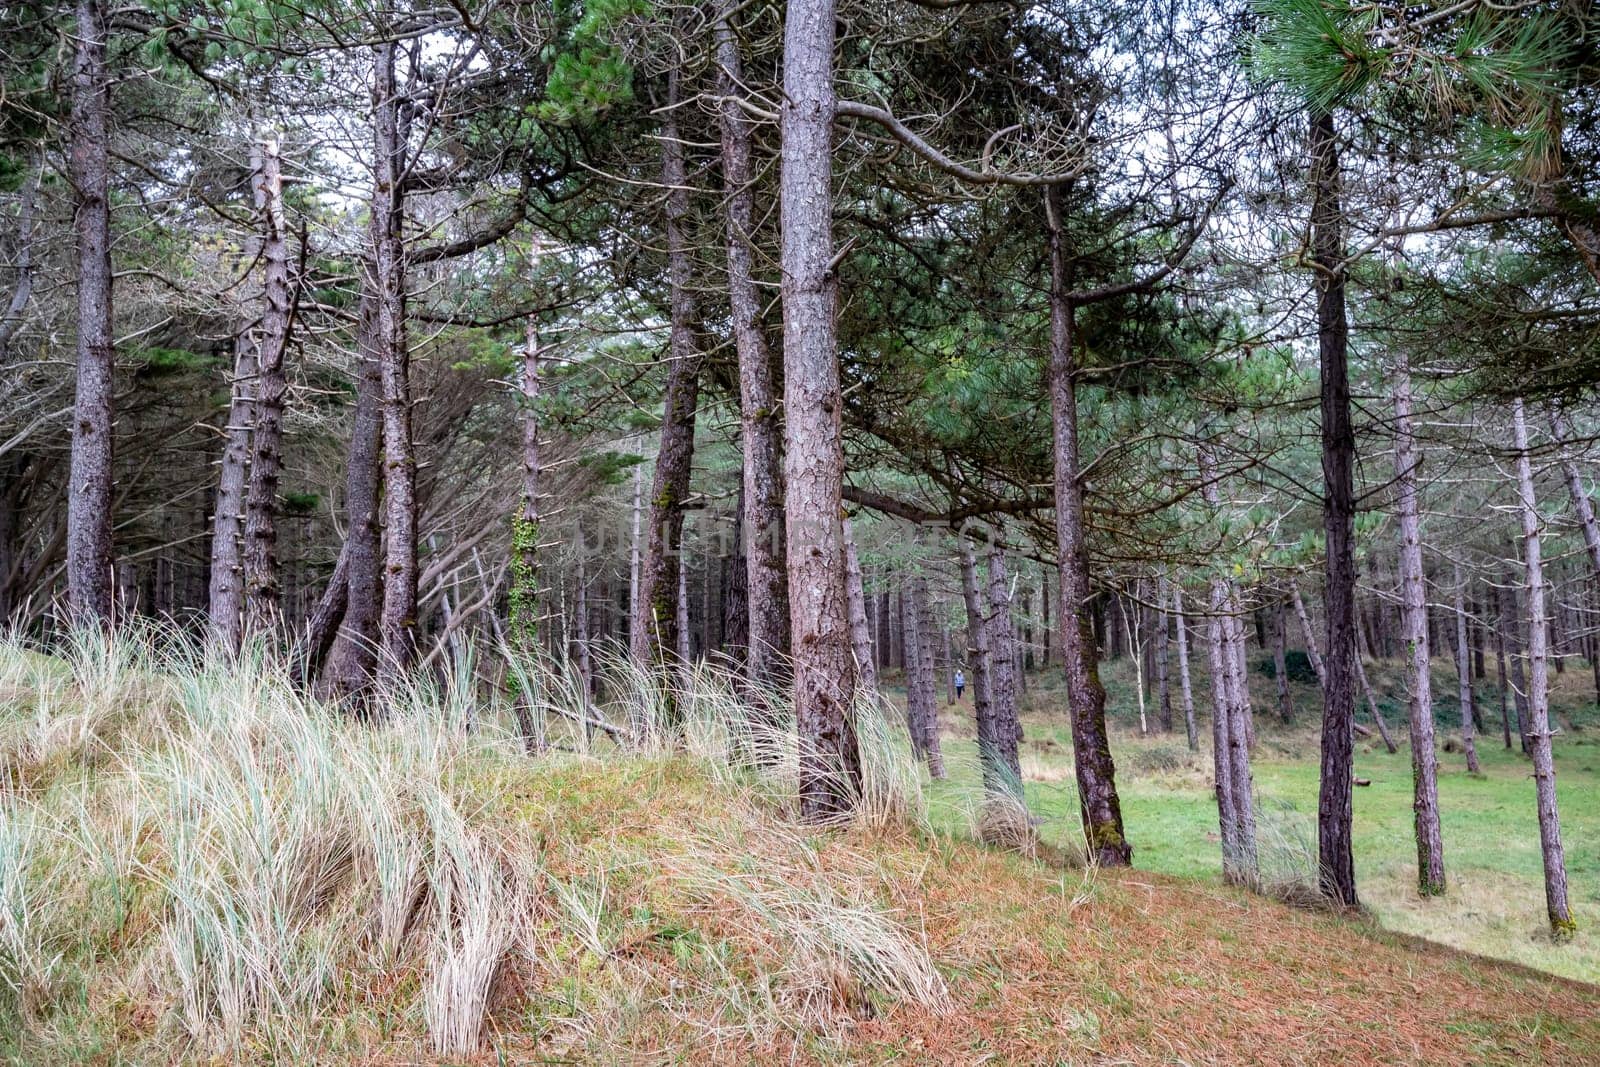 The forest at Murvagh in County Donegal, Ireland.